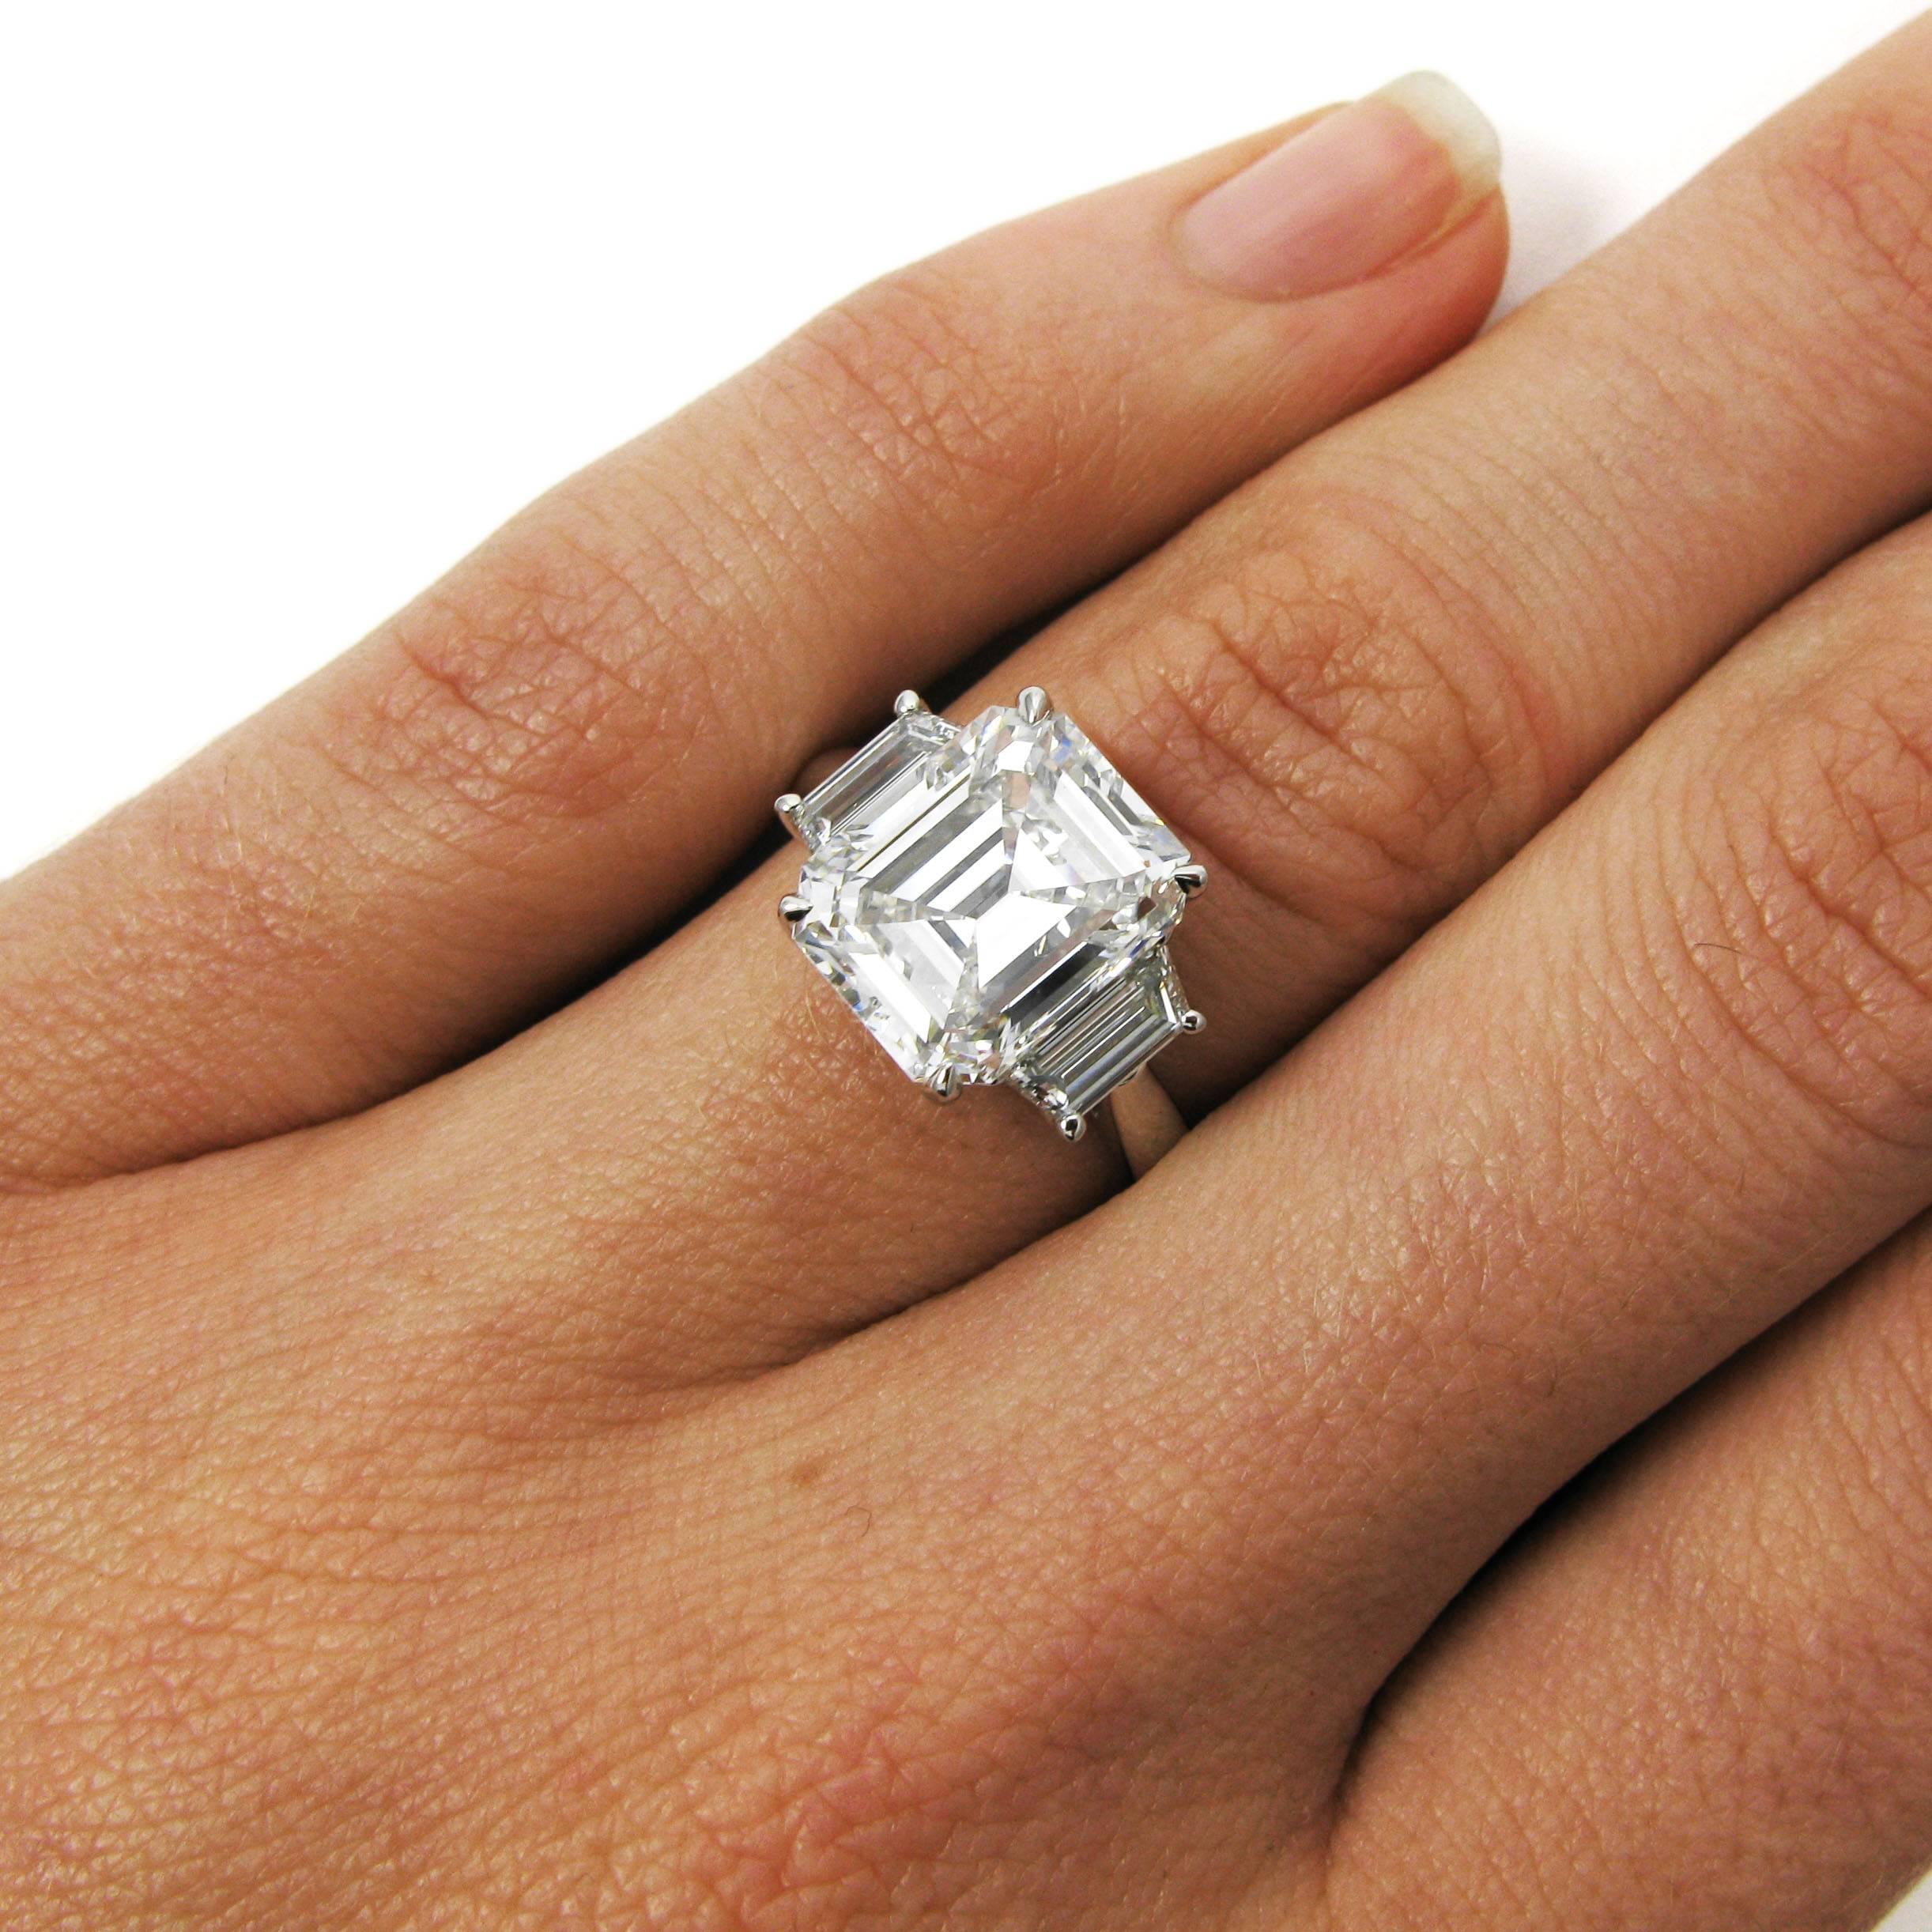 A stunning three stone ring features a 4.14 carat emerald cut diamond with G color and VS1 clarity flanked by two trapezoid-cut diamonds totaling 0.80 carat. Mounted simply in platinum. 

Purchase includes GIA Diamond Grading Report 5181877683,